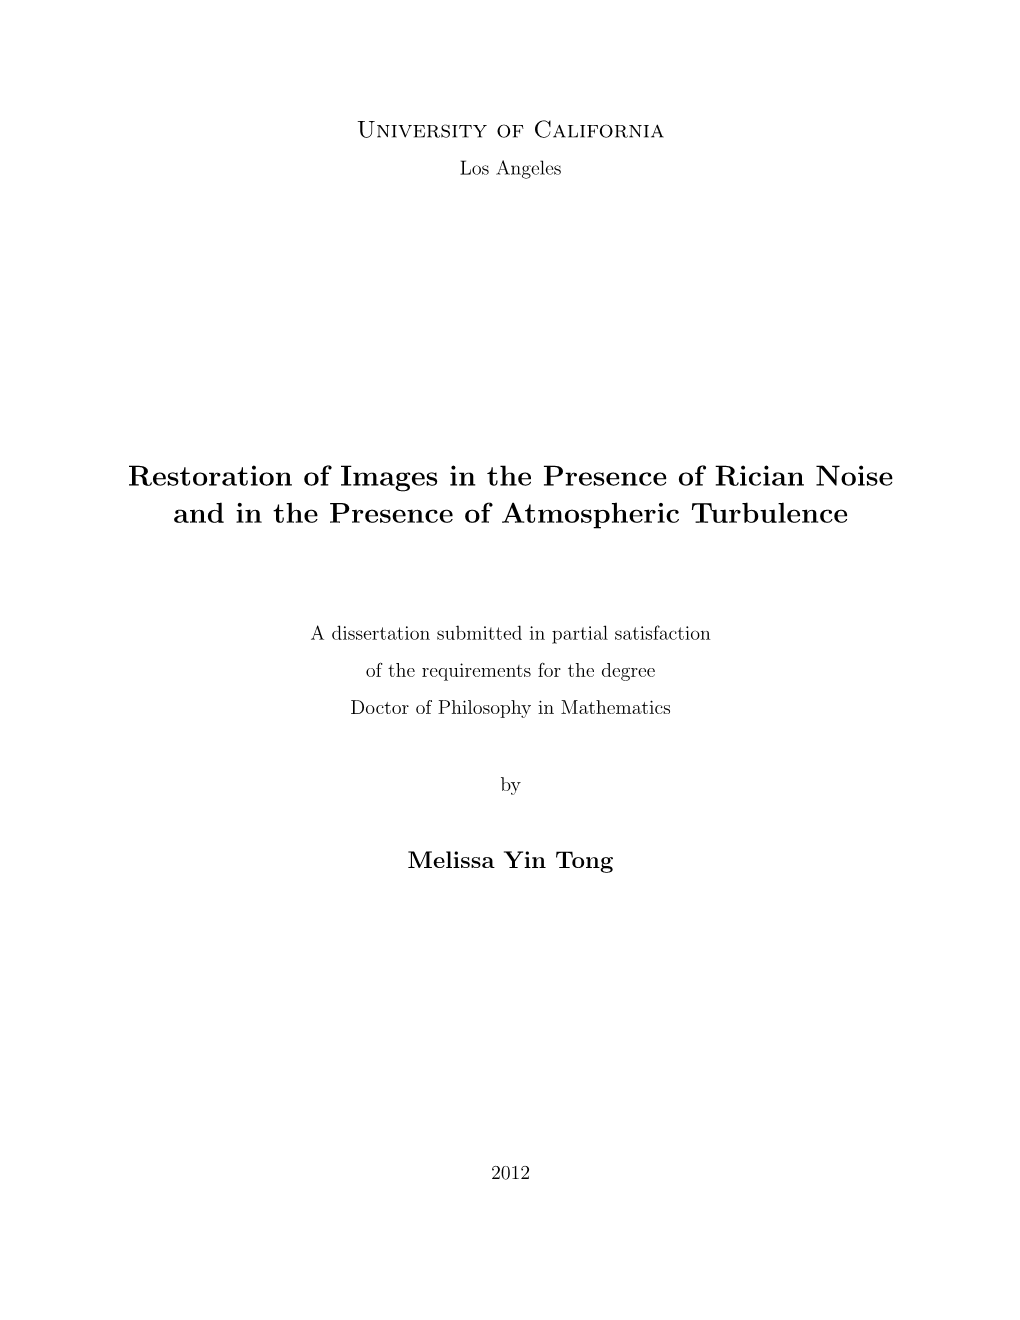 Restoration of Images in the Presence of Rician Noise and in the Presence of Atmospheric Turbulence